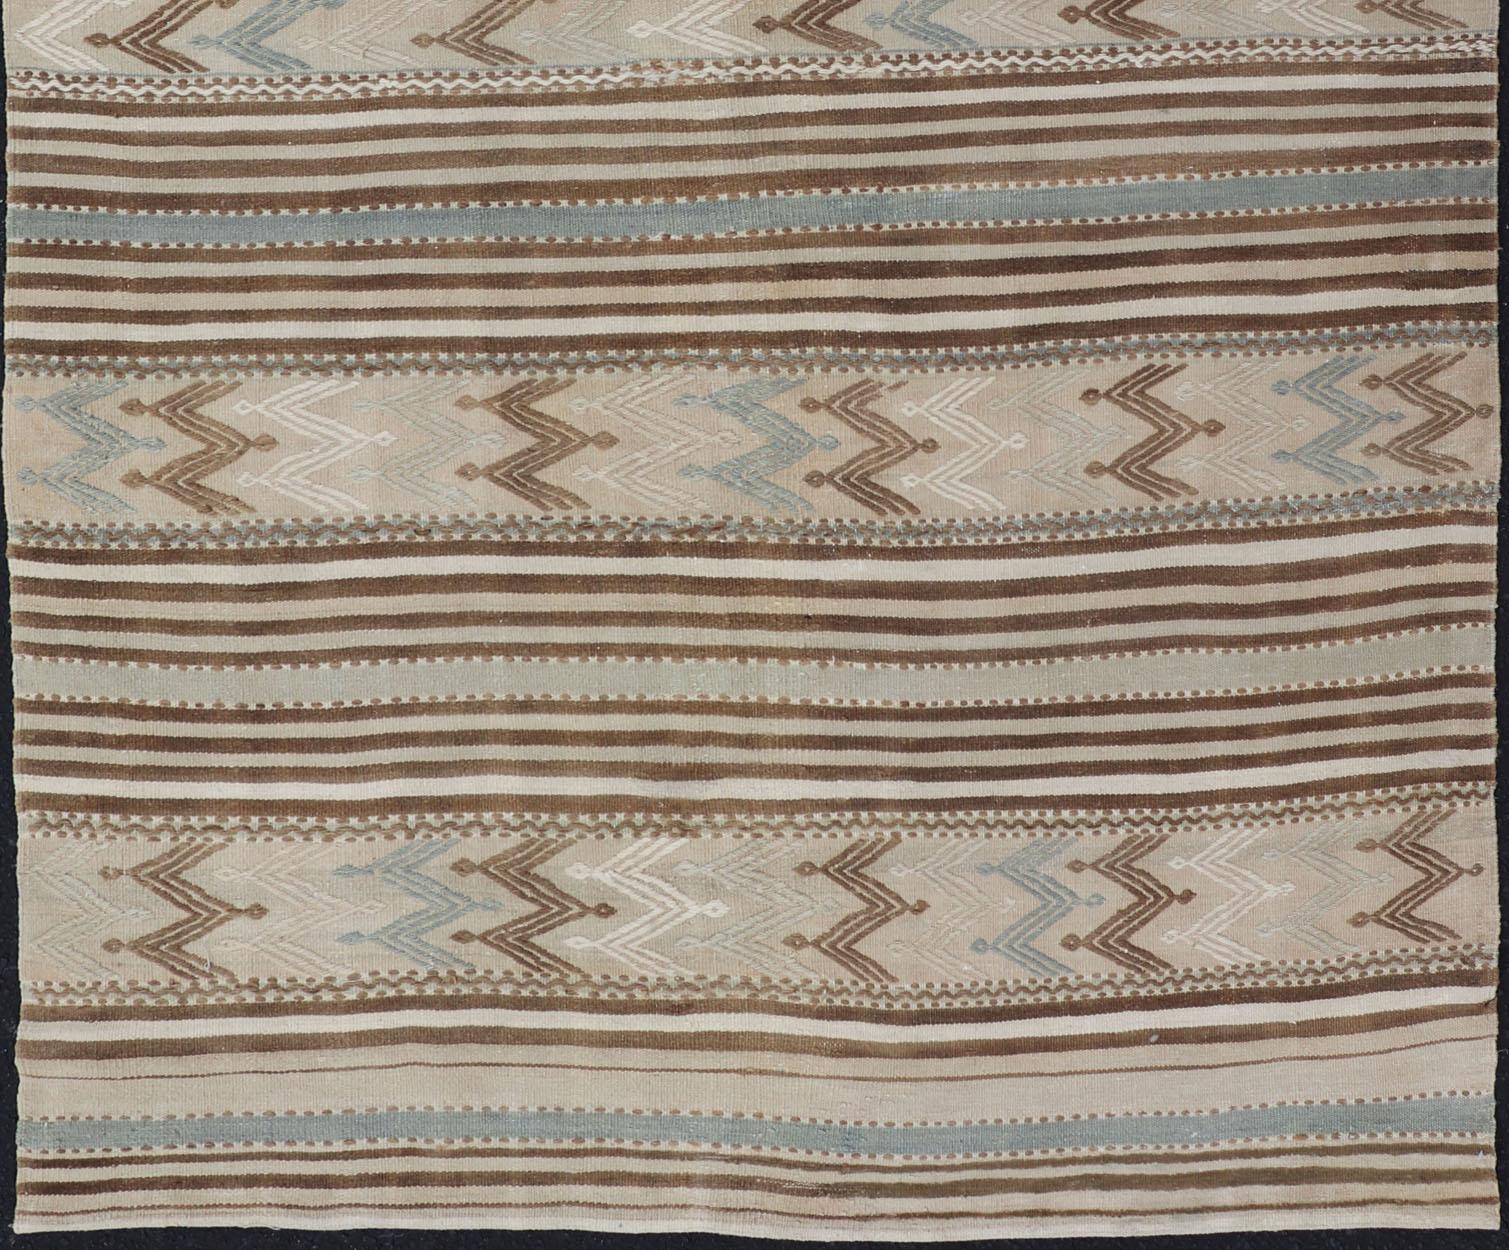 Turkish Hand Woven Flat-Weave Embroideries Kilim in Taupe, Brown, and Lt. Blue  For Sale 2